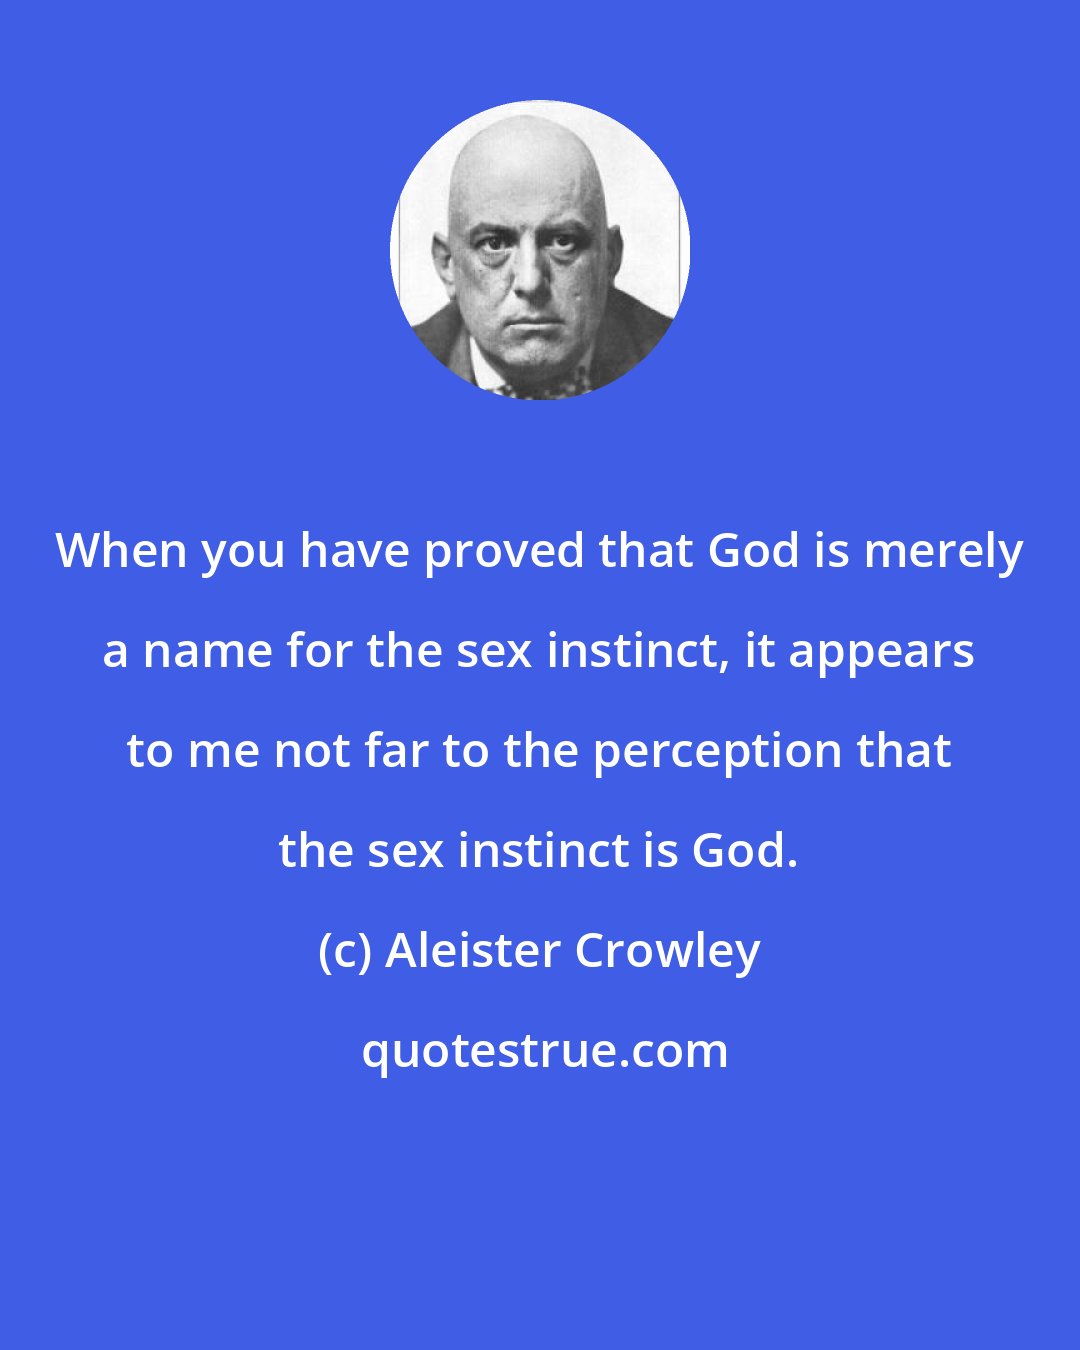 Aleister Crowley: When you have proved that God is merely a name for the sex instinct, it appears to me not far to the perception that the sex instinct is God.